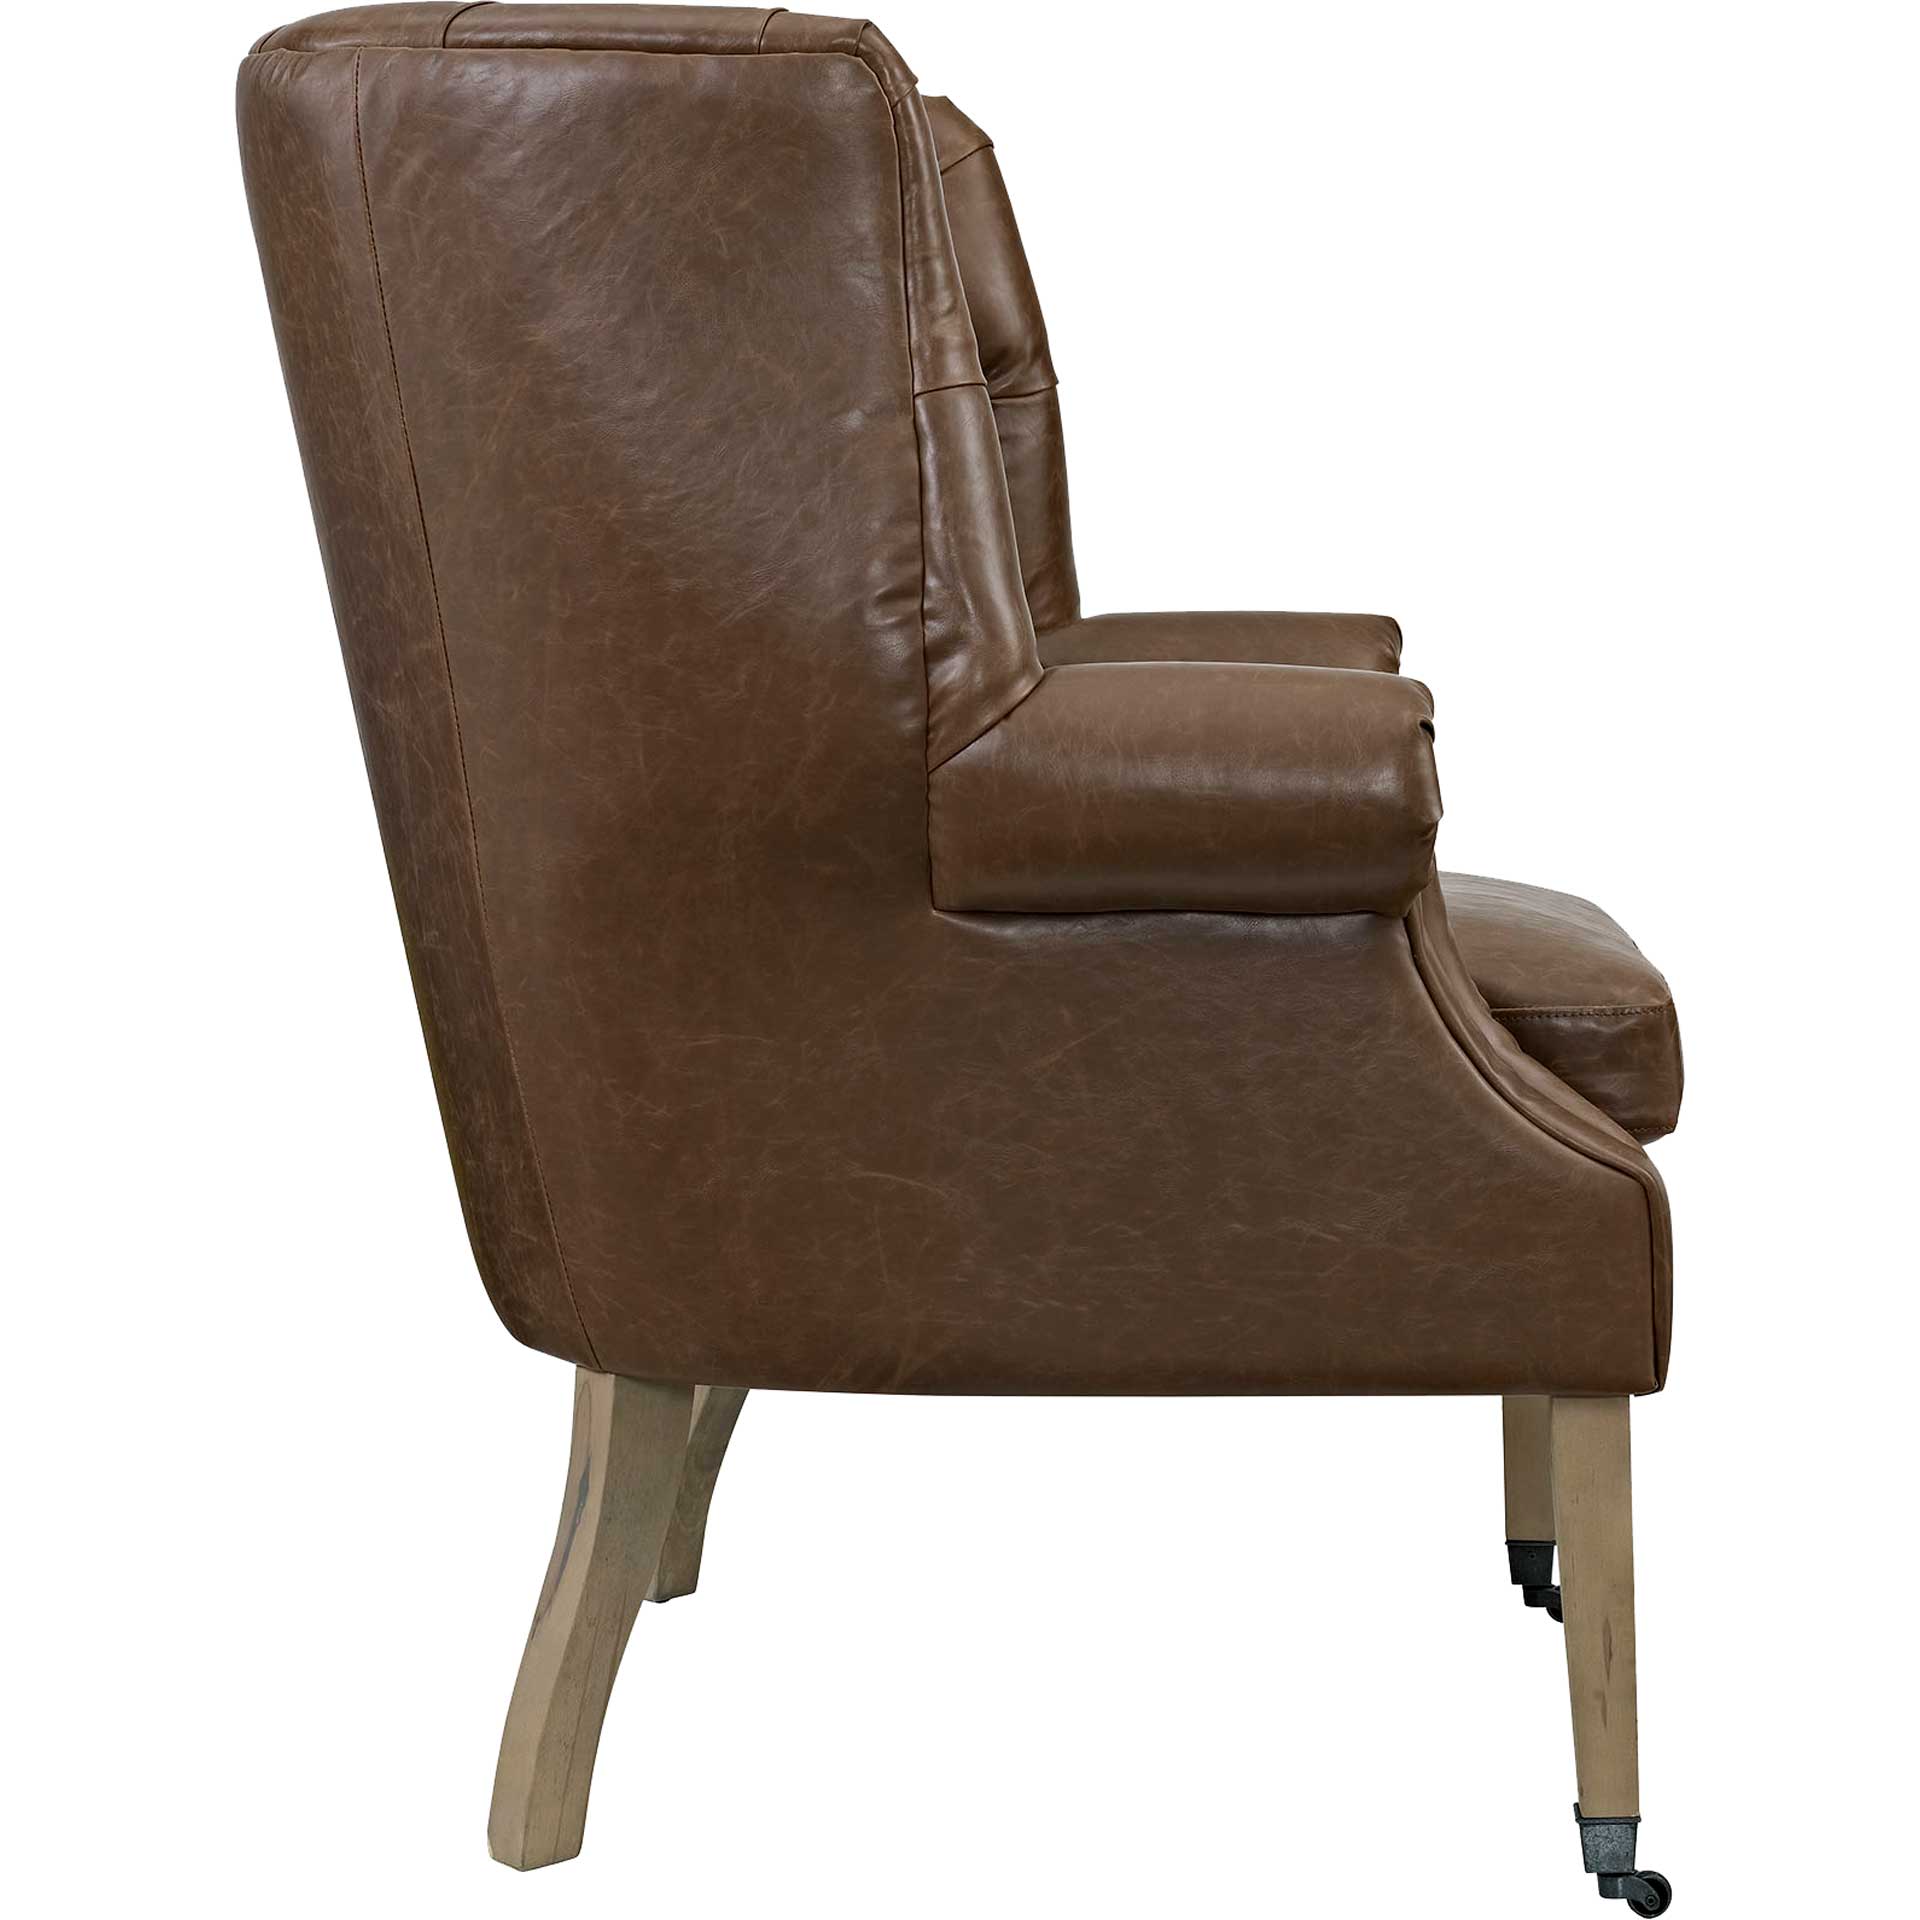 Camron Upholstered Vinyl Lounge Chair Brown